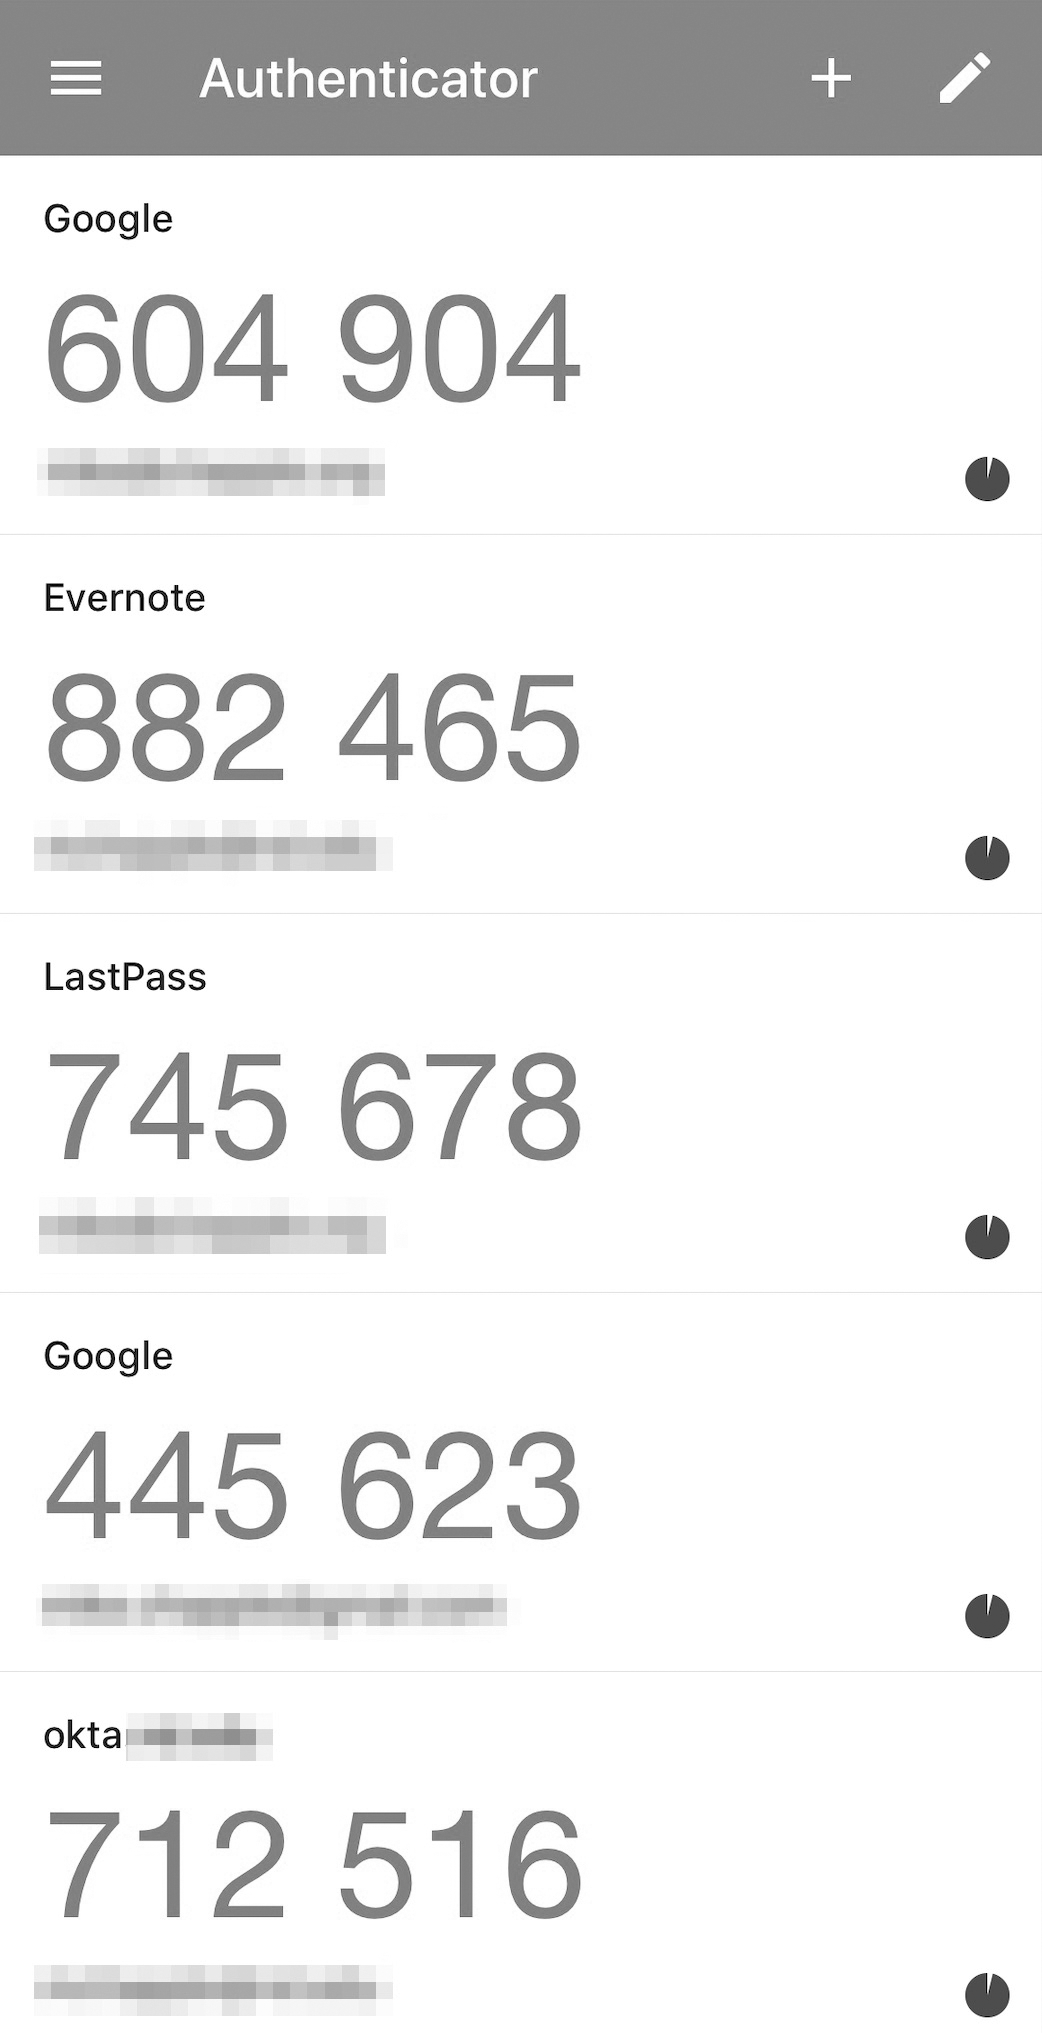 A list of services. Google Authenticator app is configured to work with a variety of services included in this list.